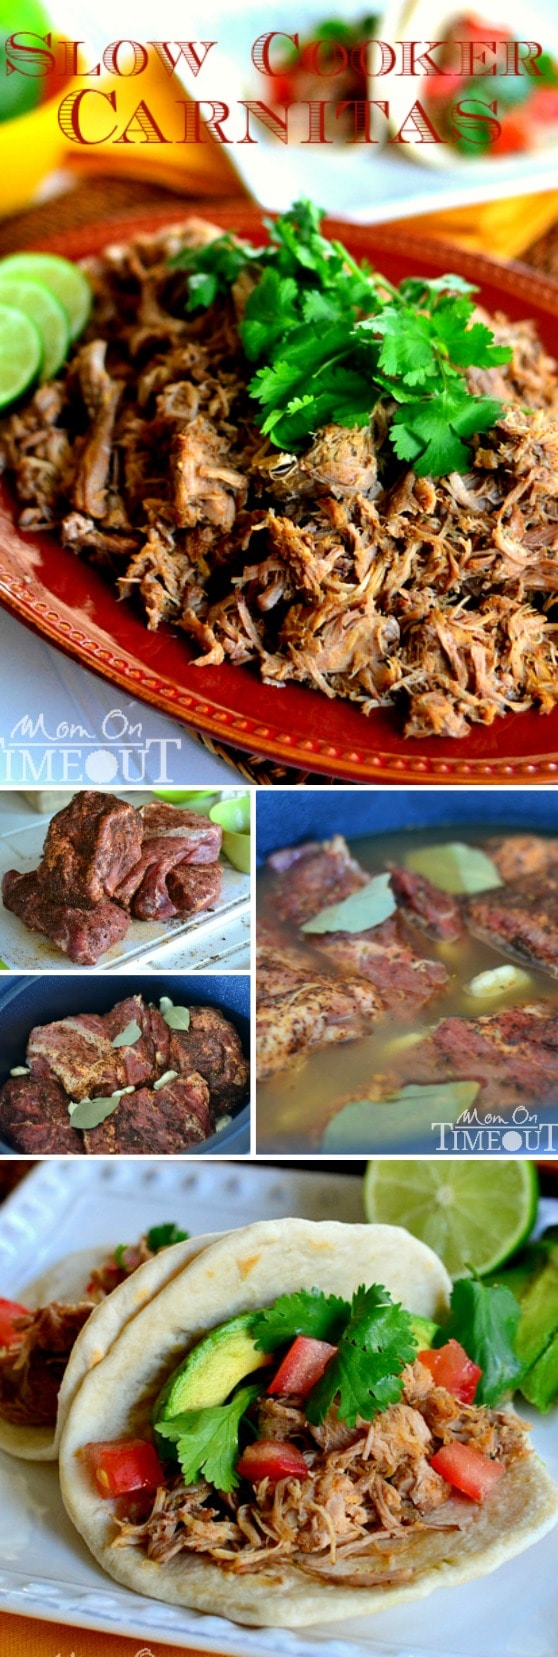 Muy Bueno Slow Cooker Carnitas - Enjoy the delicious flavors of carnitas straight from your slow cooker! Muy Bueno! | MomOnTimeout.com